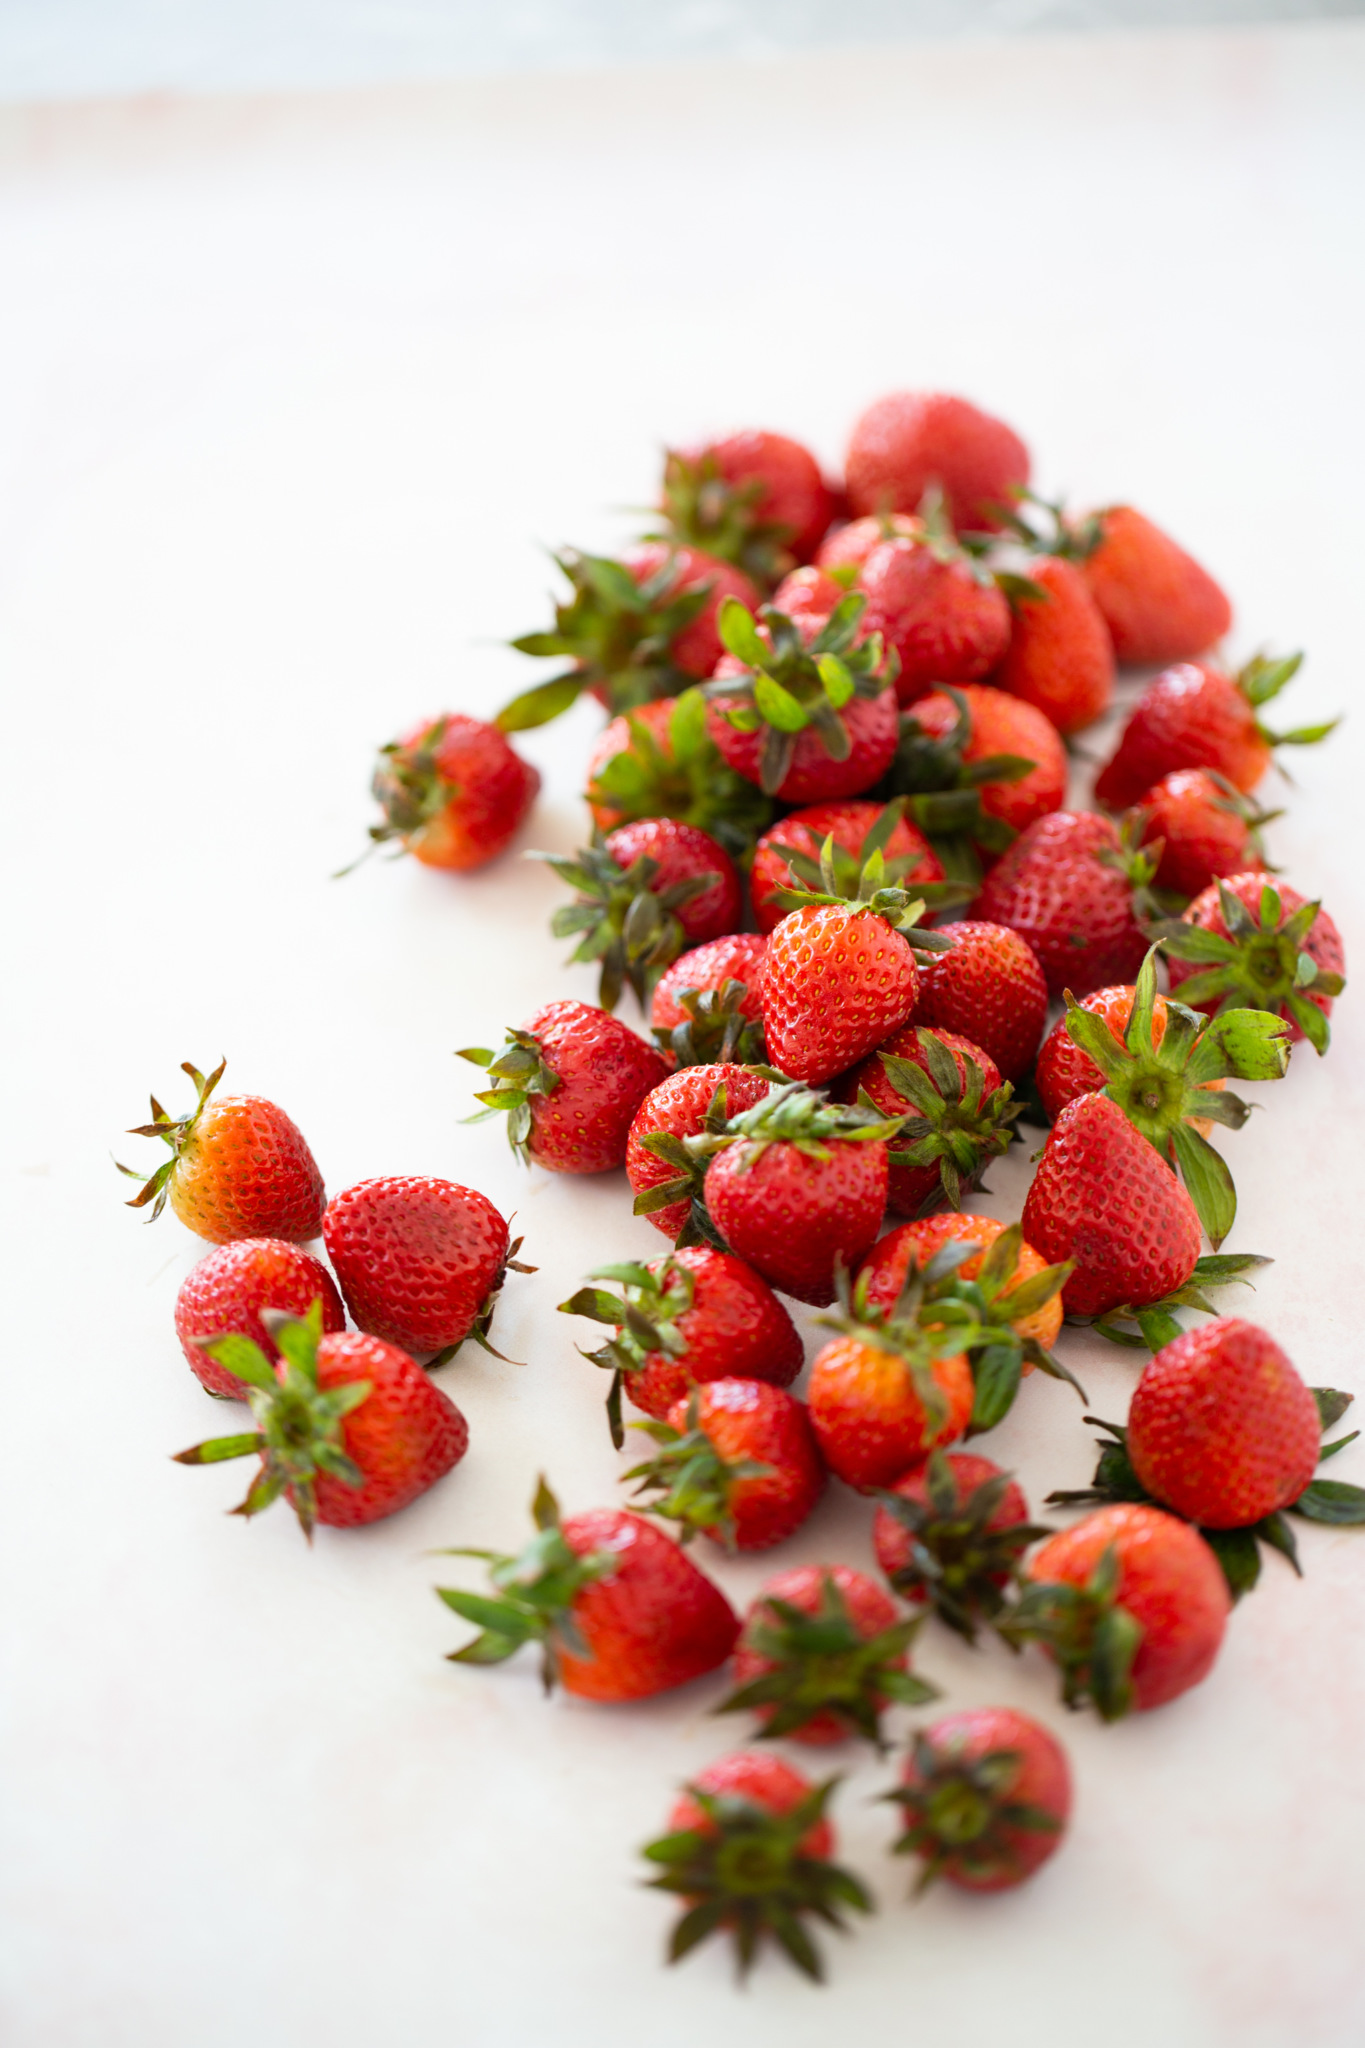 strawberries on a white surface
